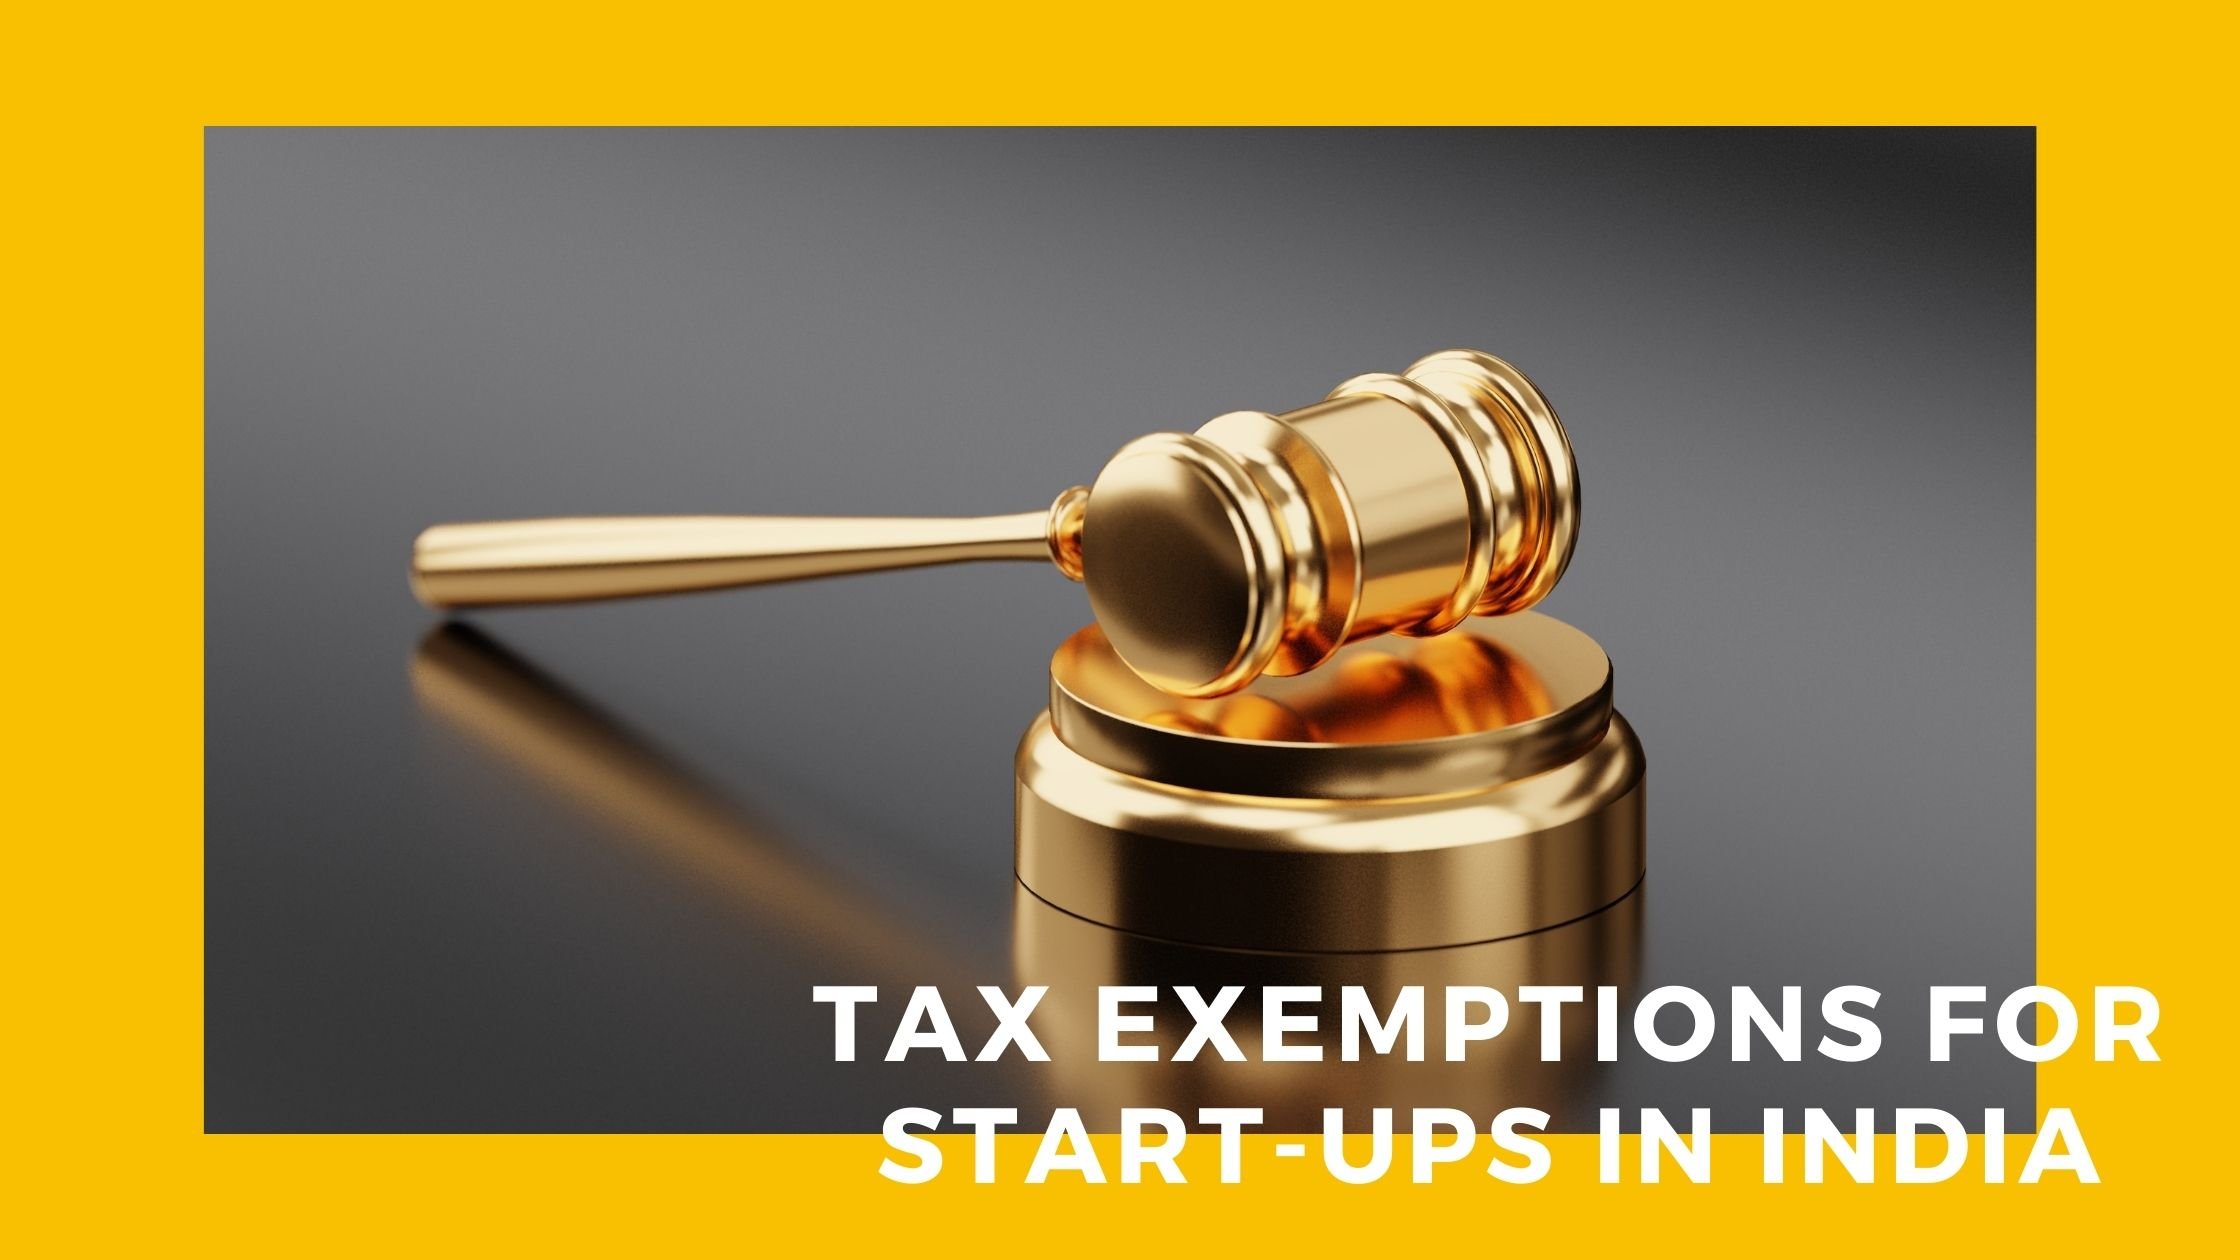 TAX EXEMPTIONS FOR START-UPS IN INDIA